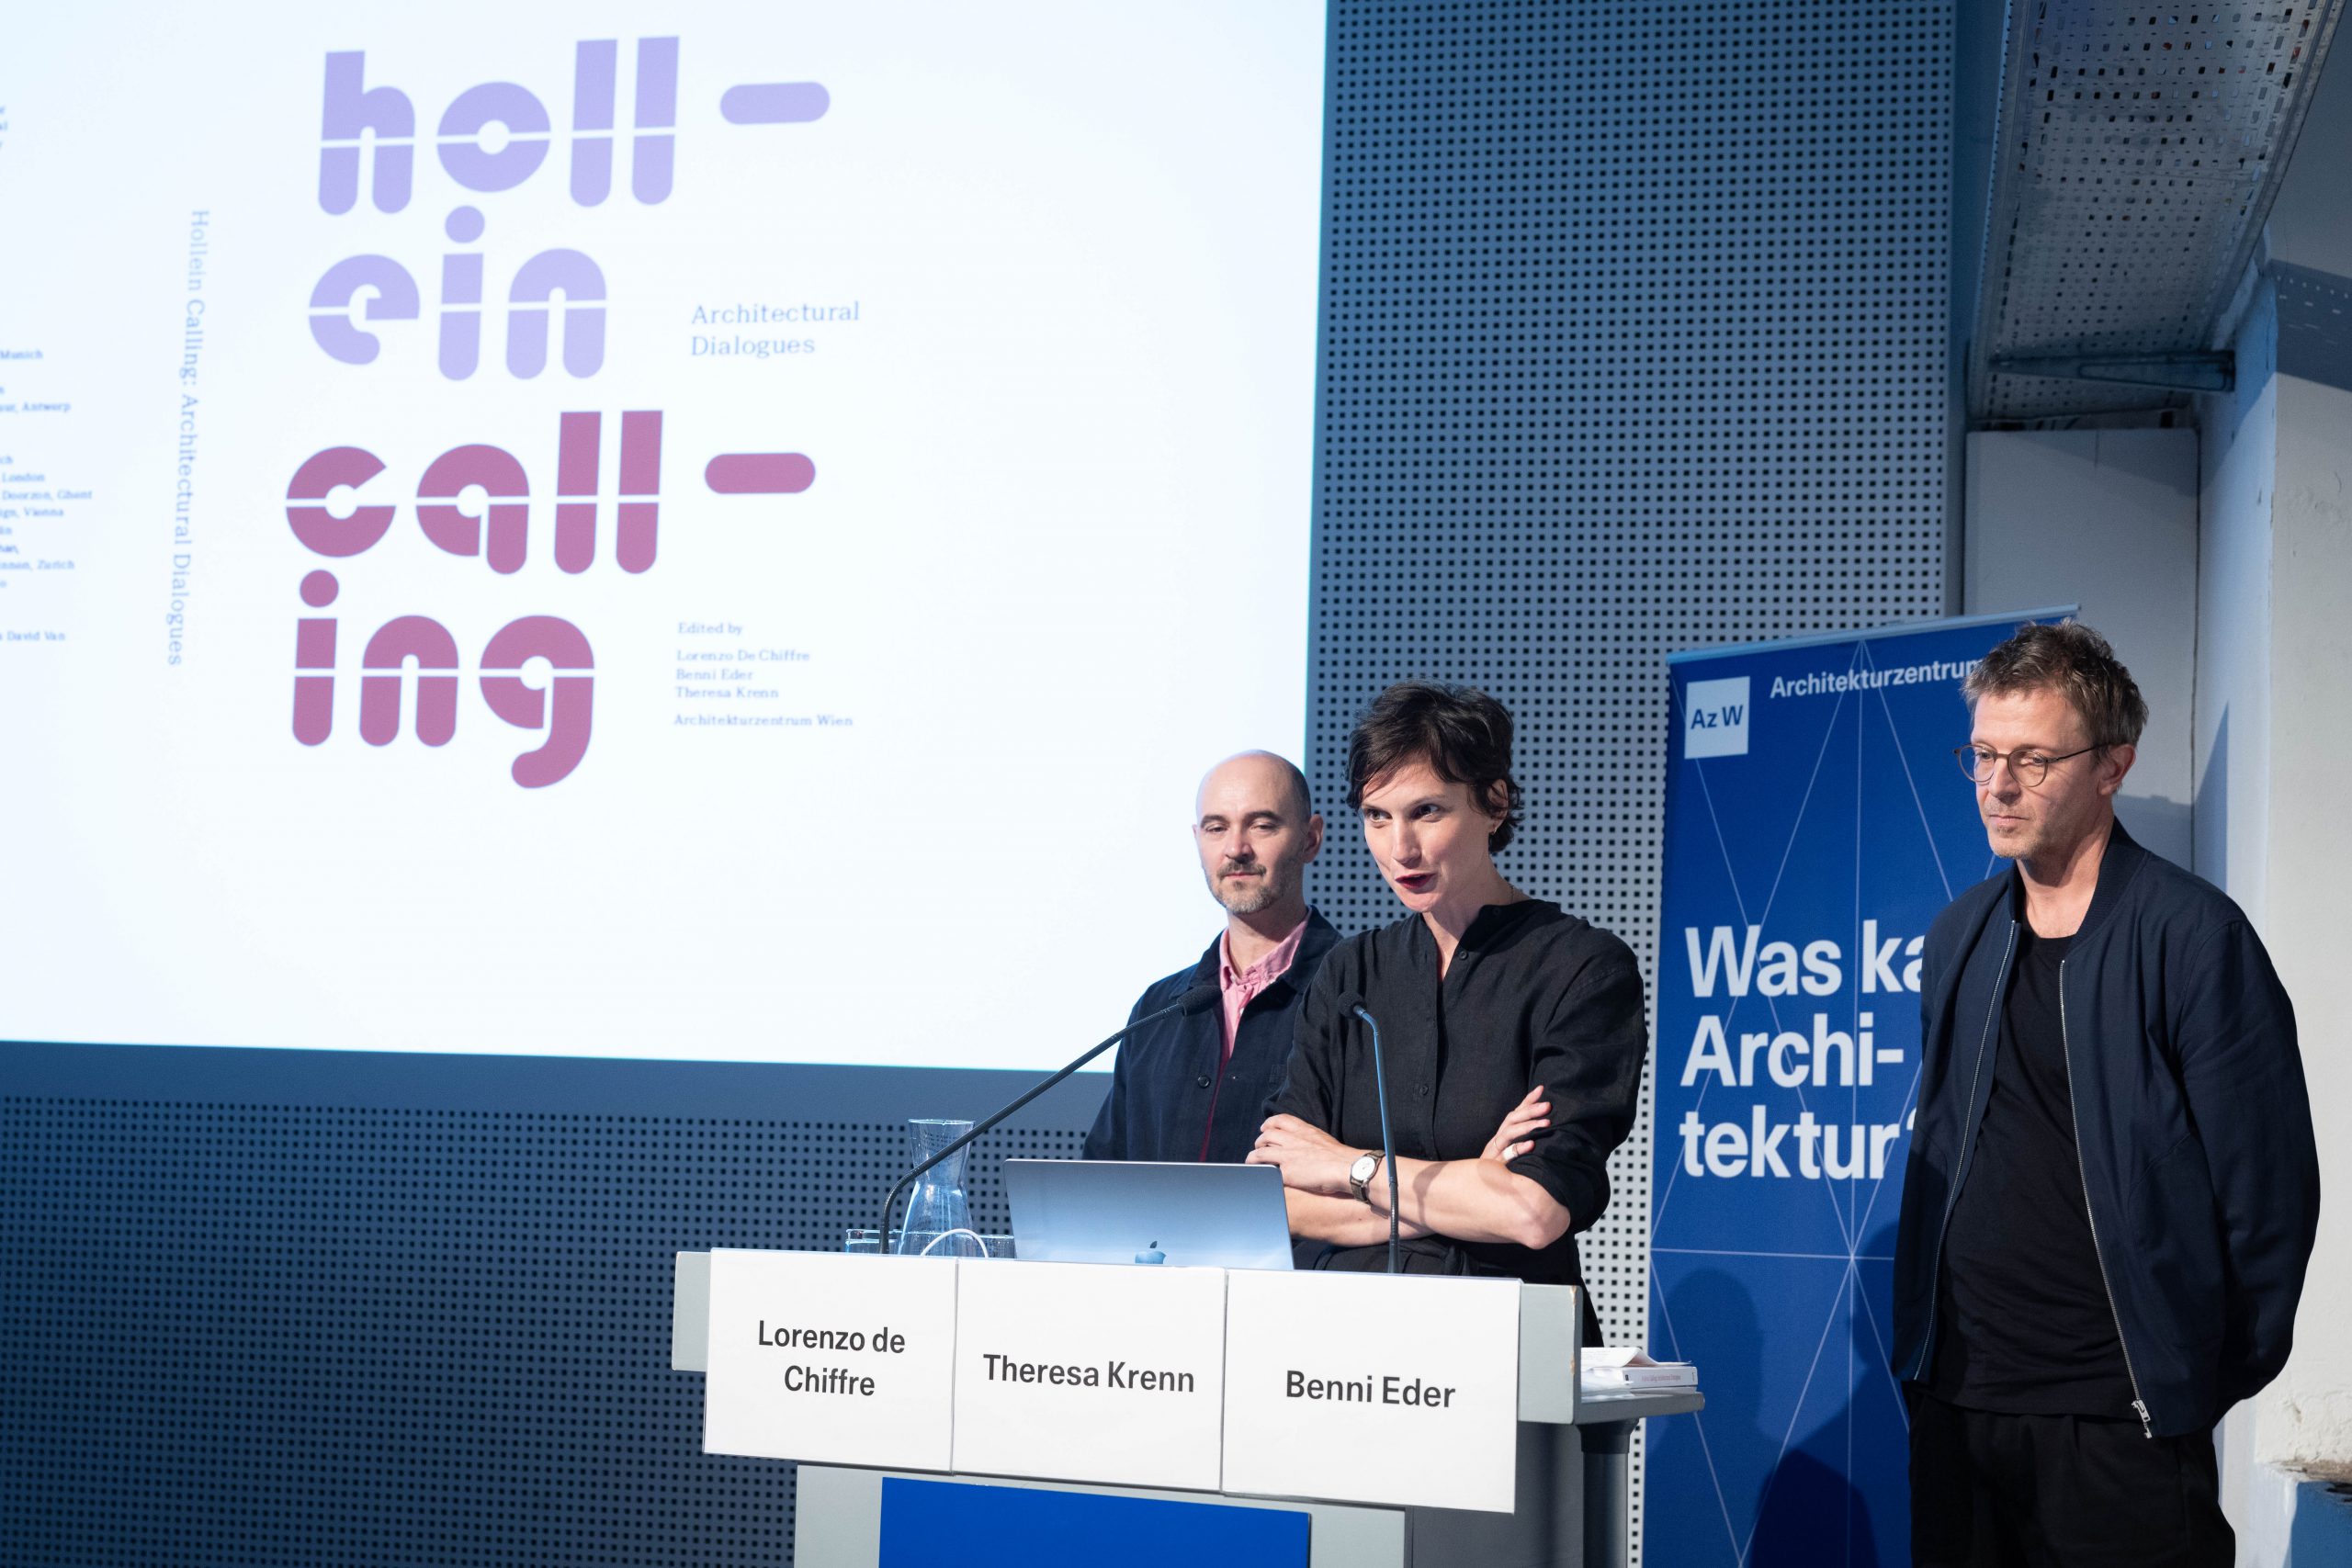 3 people dressed in black - 2 men, 1 woman - stand at a lectern, behind them a screen with the words "Hollein Calling"